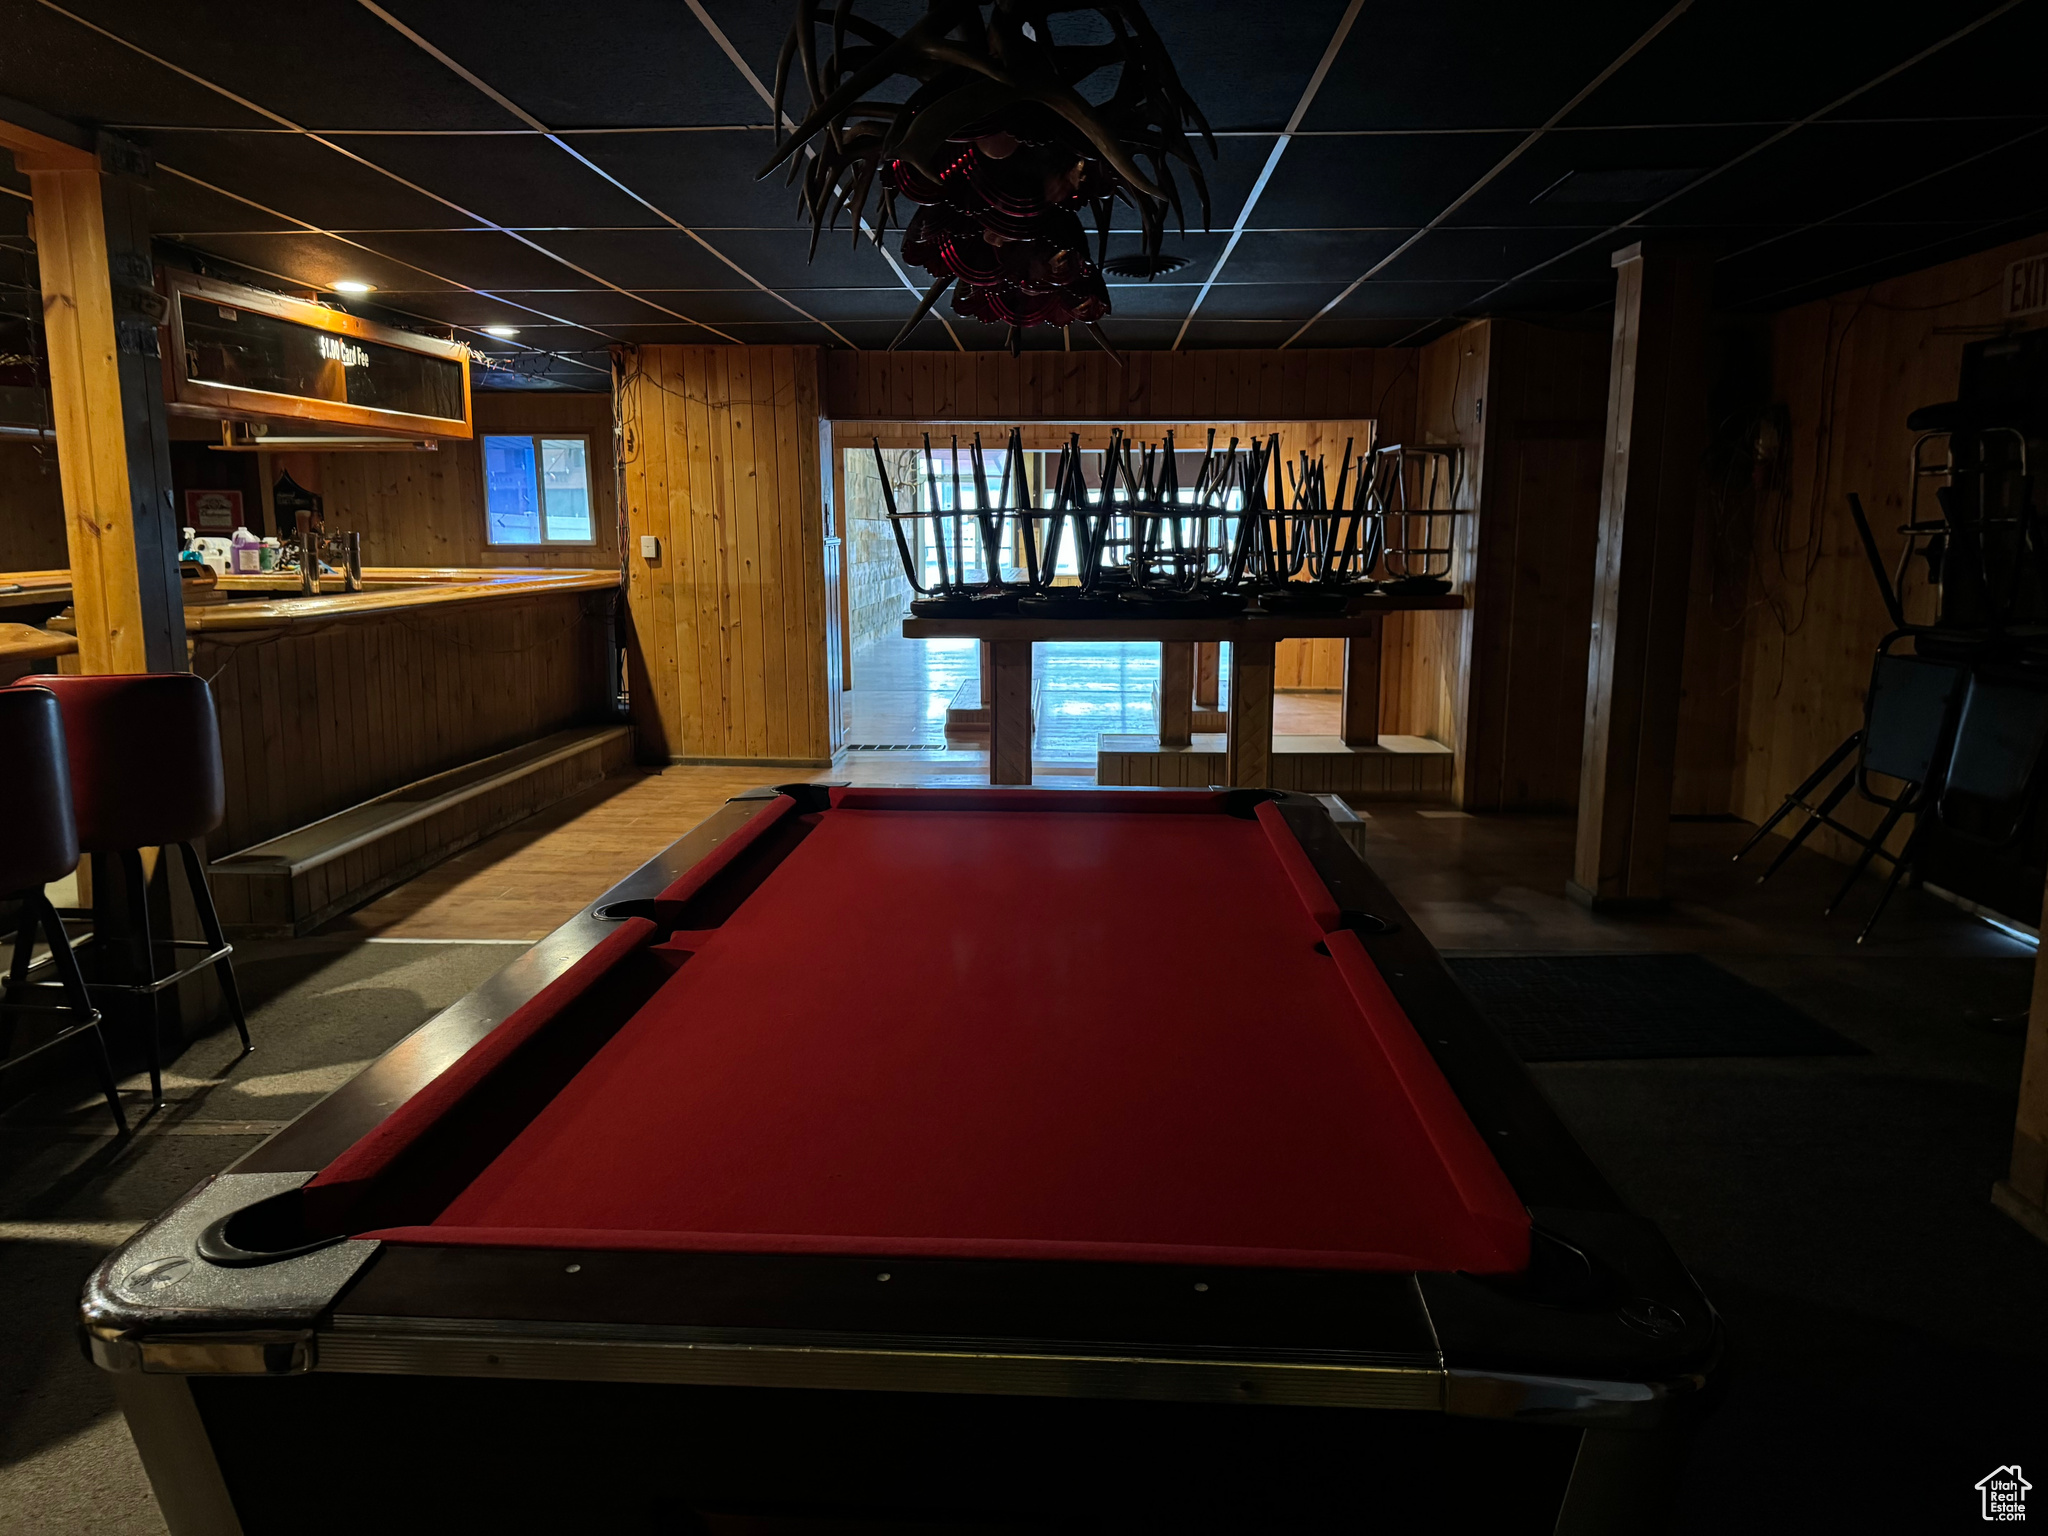 wealth of natural light, wooden walls, and pool table